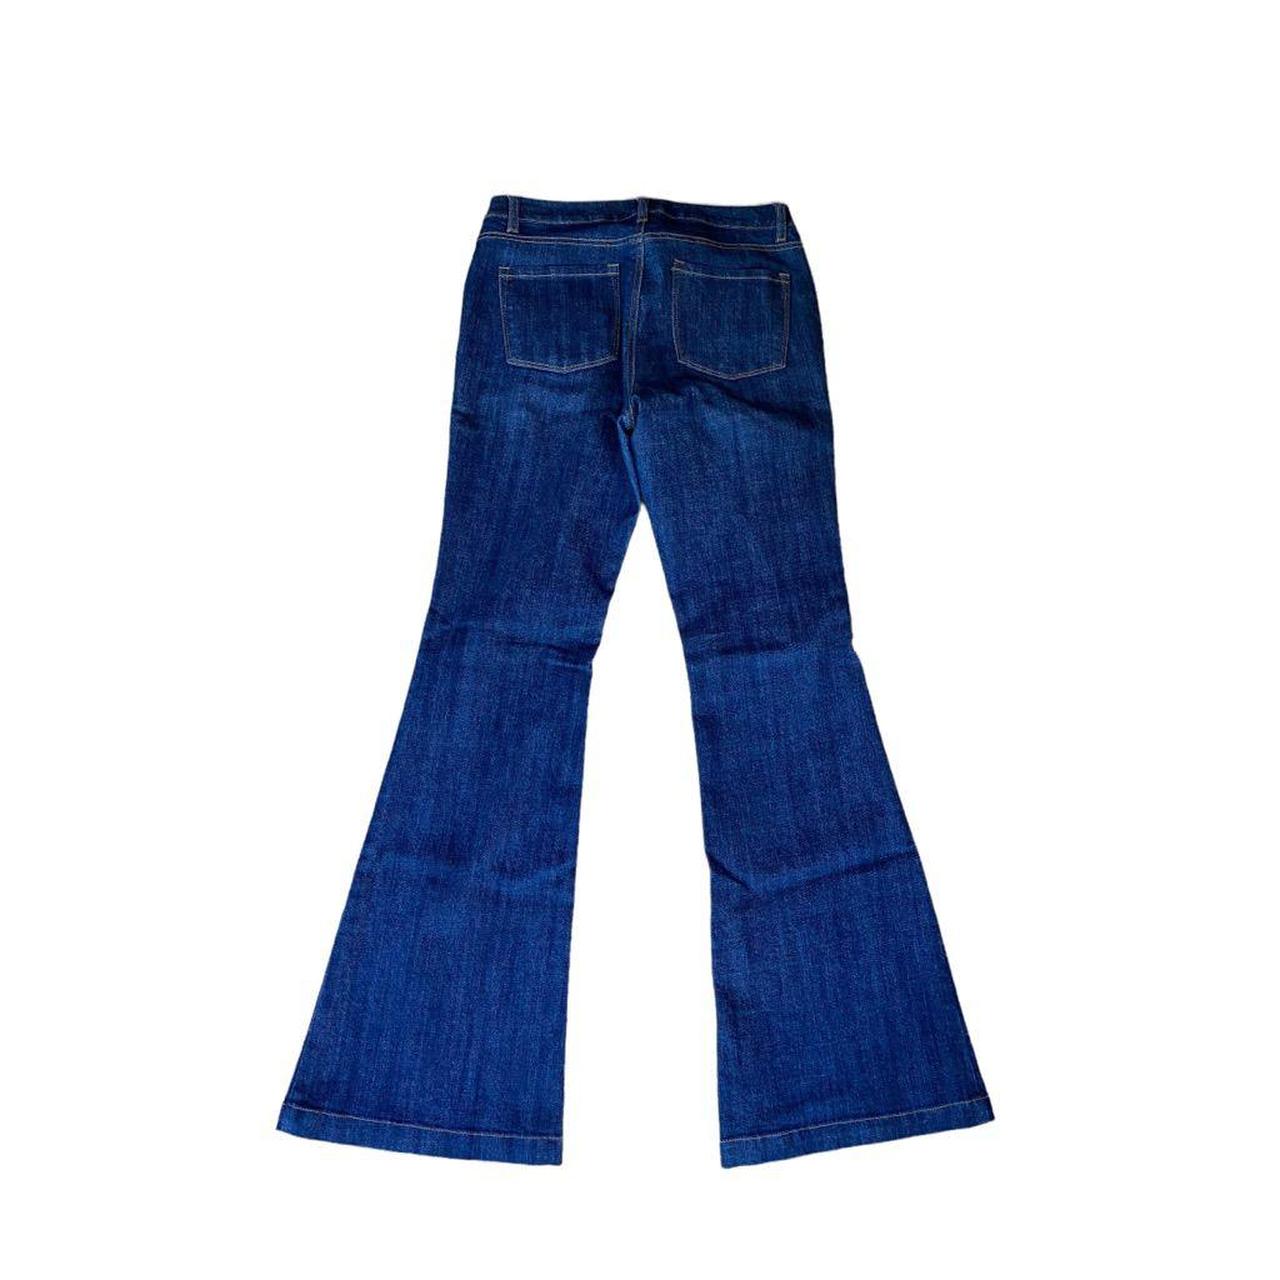 Product Image 4 - Mossimo bell bottom jeans size